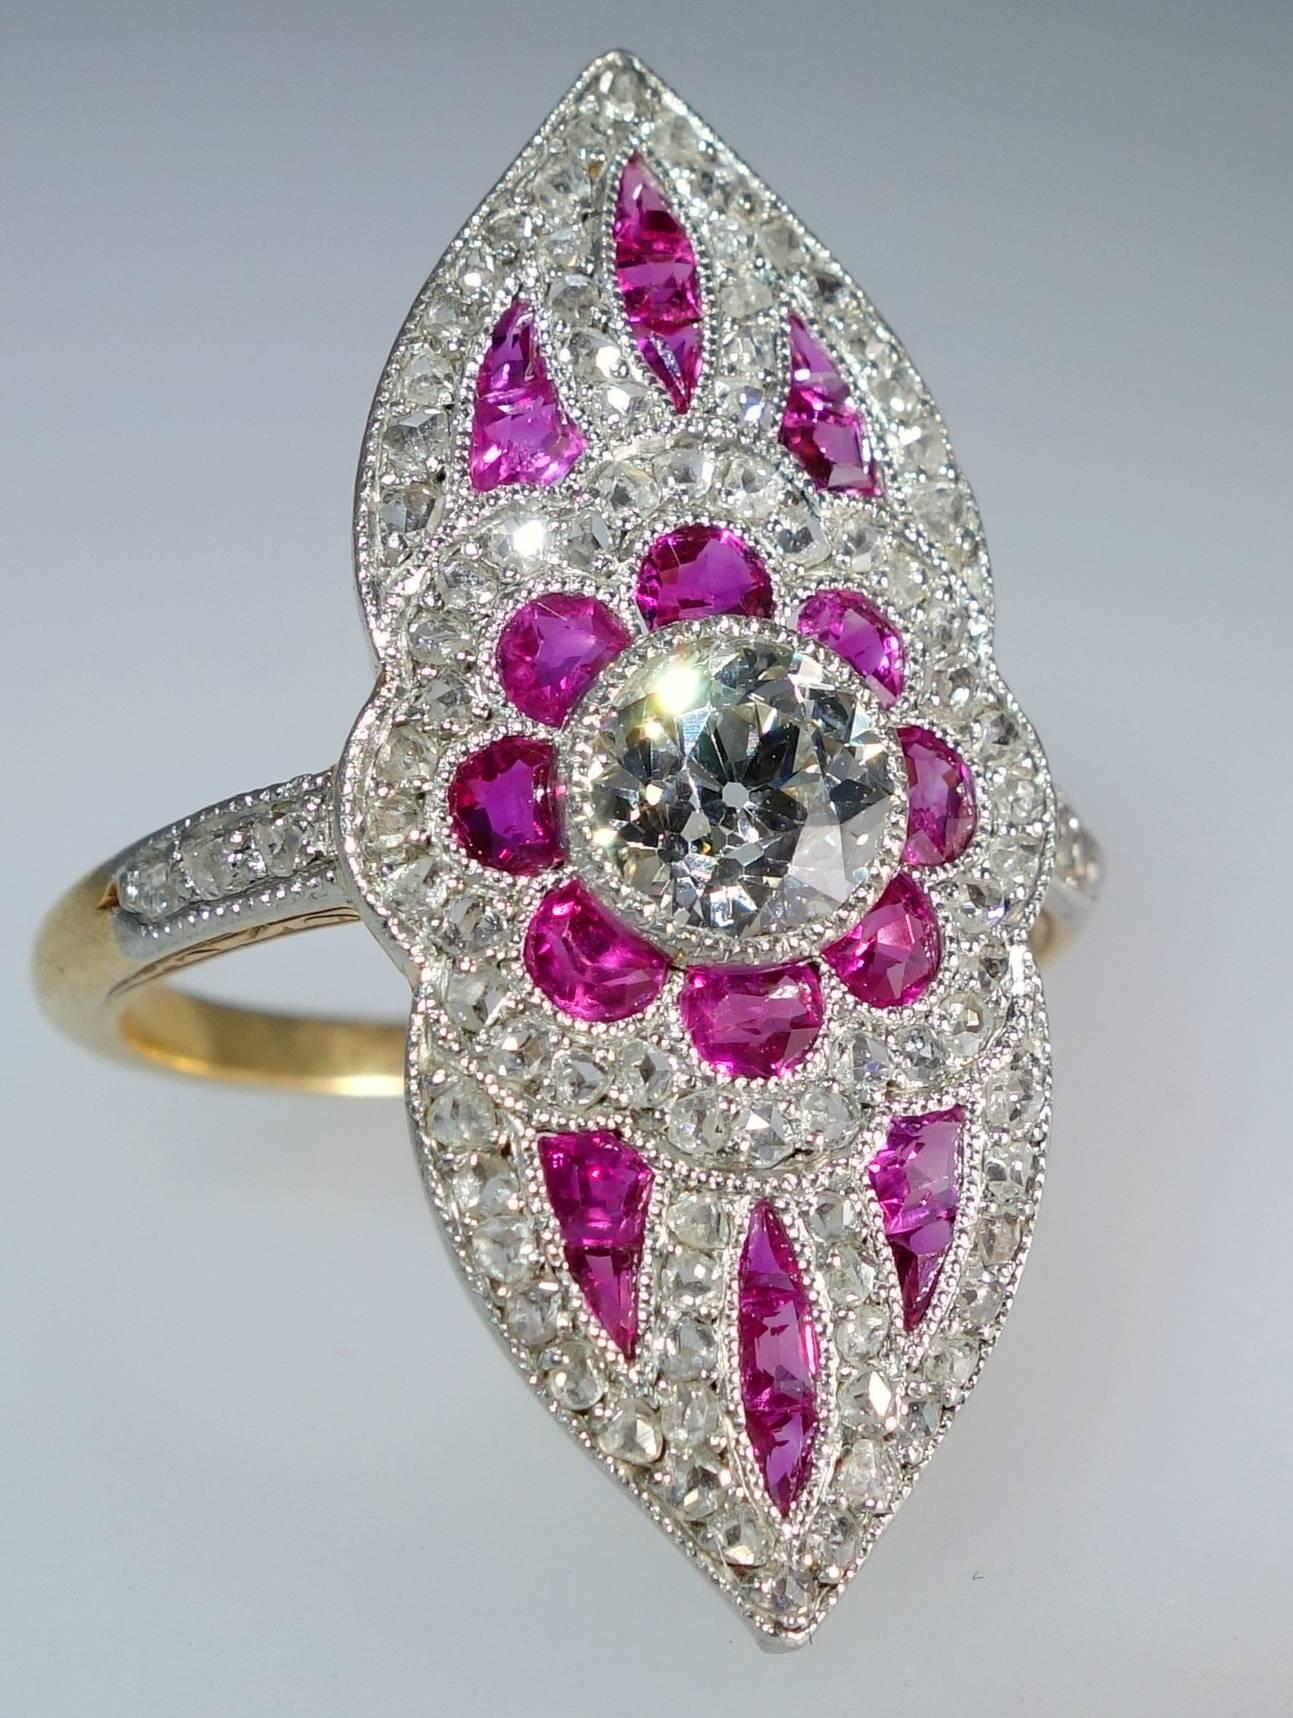 Authentic French Belle Epoque jewelry, such as this ring, is getting extremely difficult to find.  This platinum topped gold ring is a little masterpiece - notice how the 22 fine natural unheated Burma rubies are all fancy cut in milgrained settings